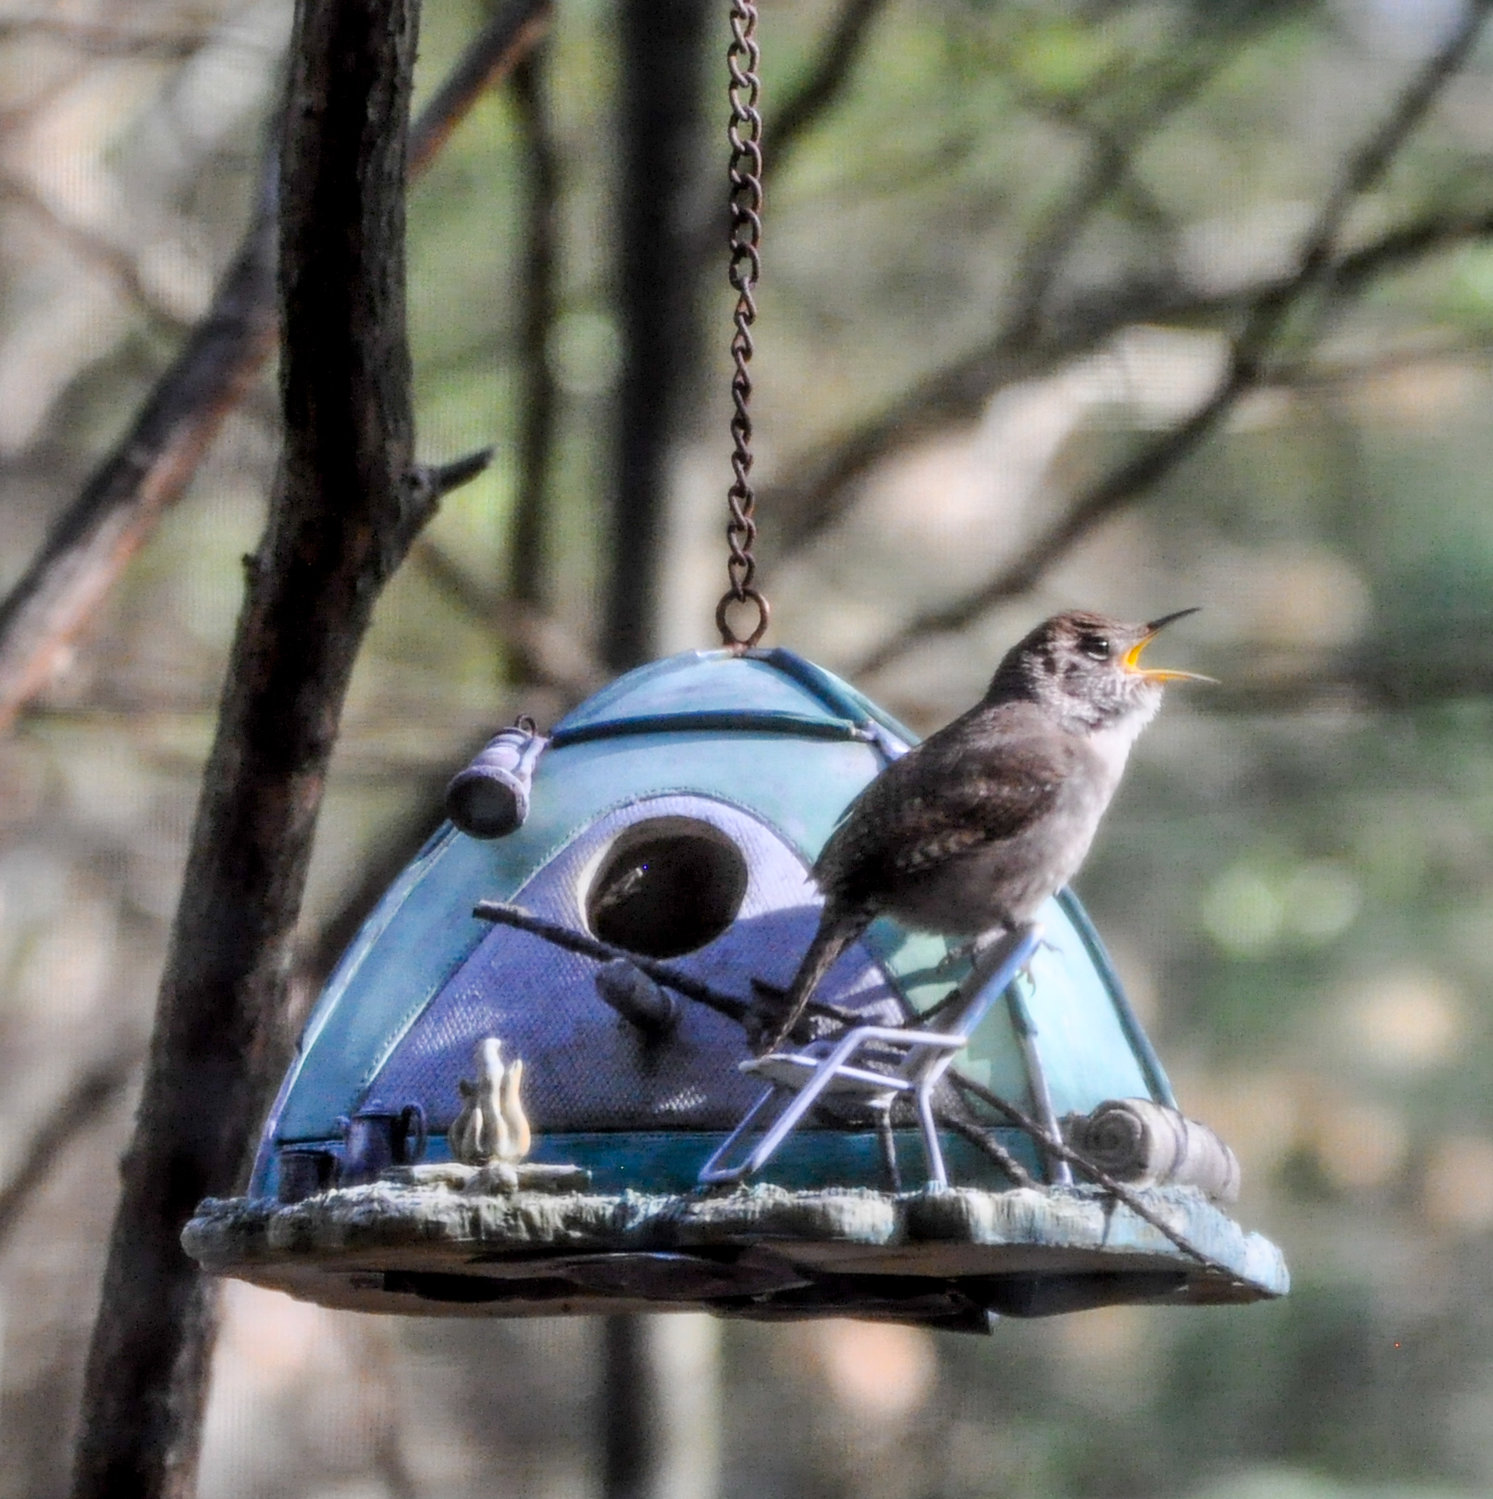 “Uh-huh,” I mumbled, hoping he couldn’t hear the camera clicking away as I focused on the birds flitting in and out of my cool dome-tent birdhouse.